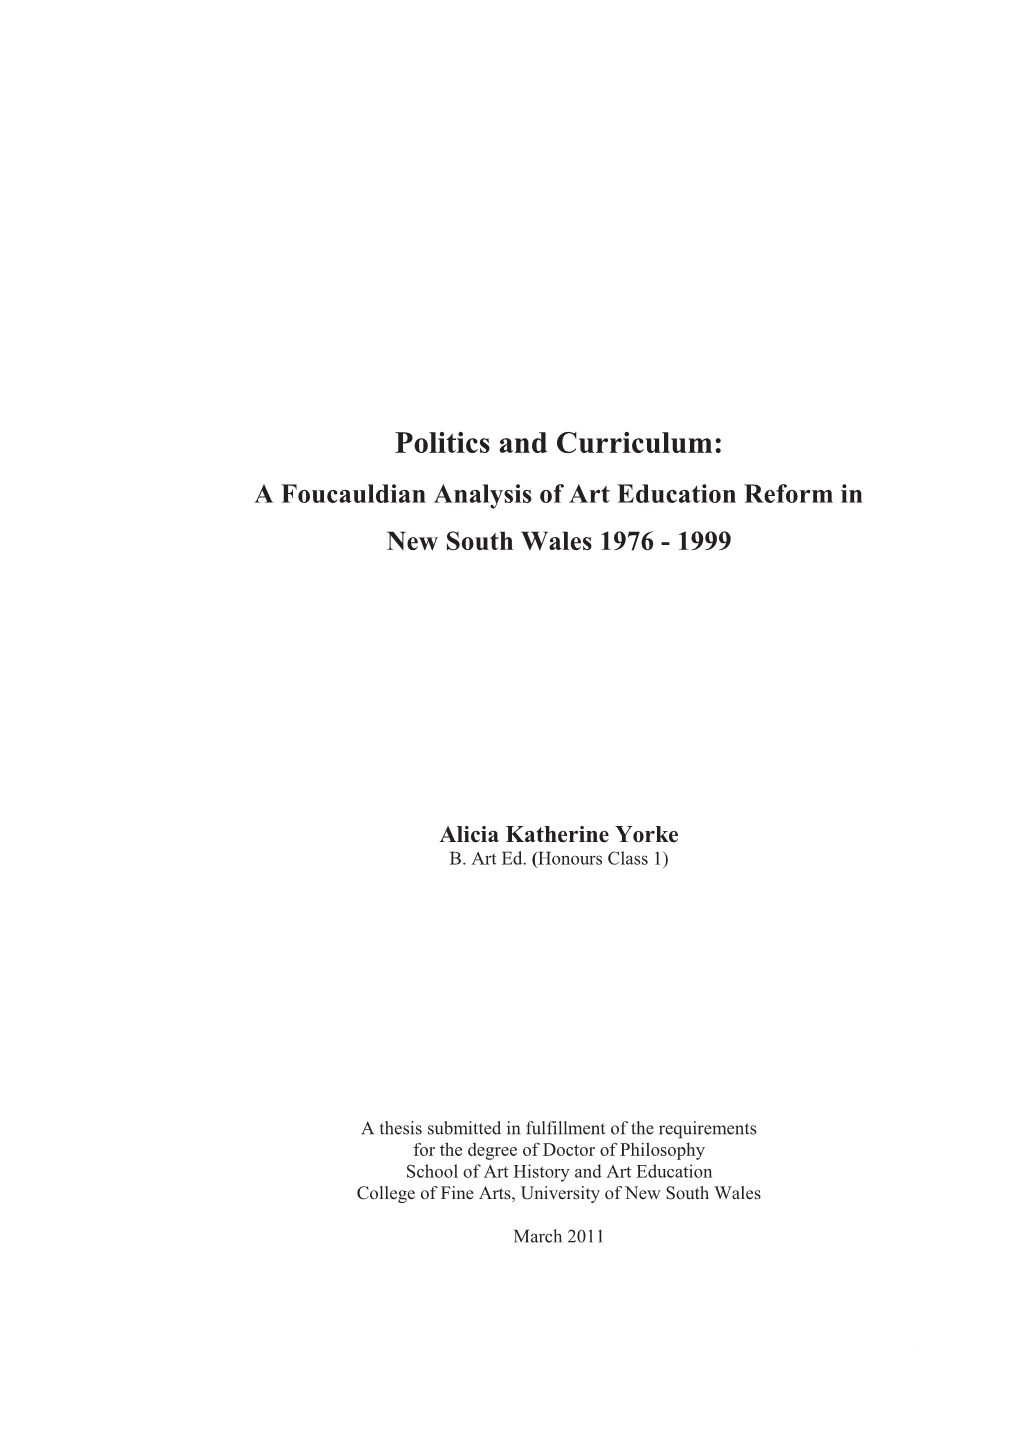 Politics and Curriculum: a Foucauldian Analysis of Art Education Reform in New South Wales 1976 - 1999